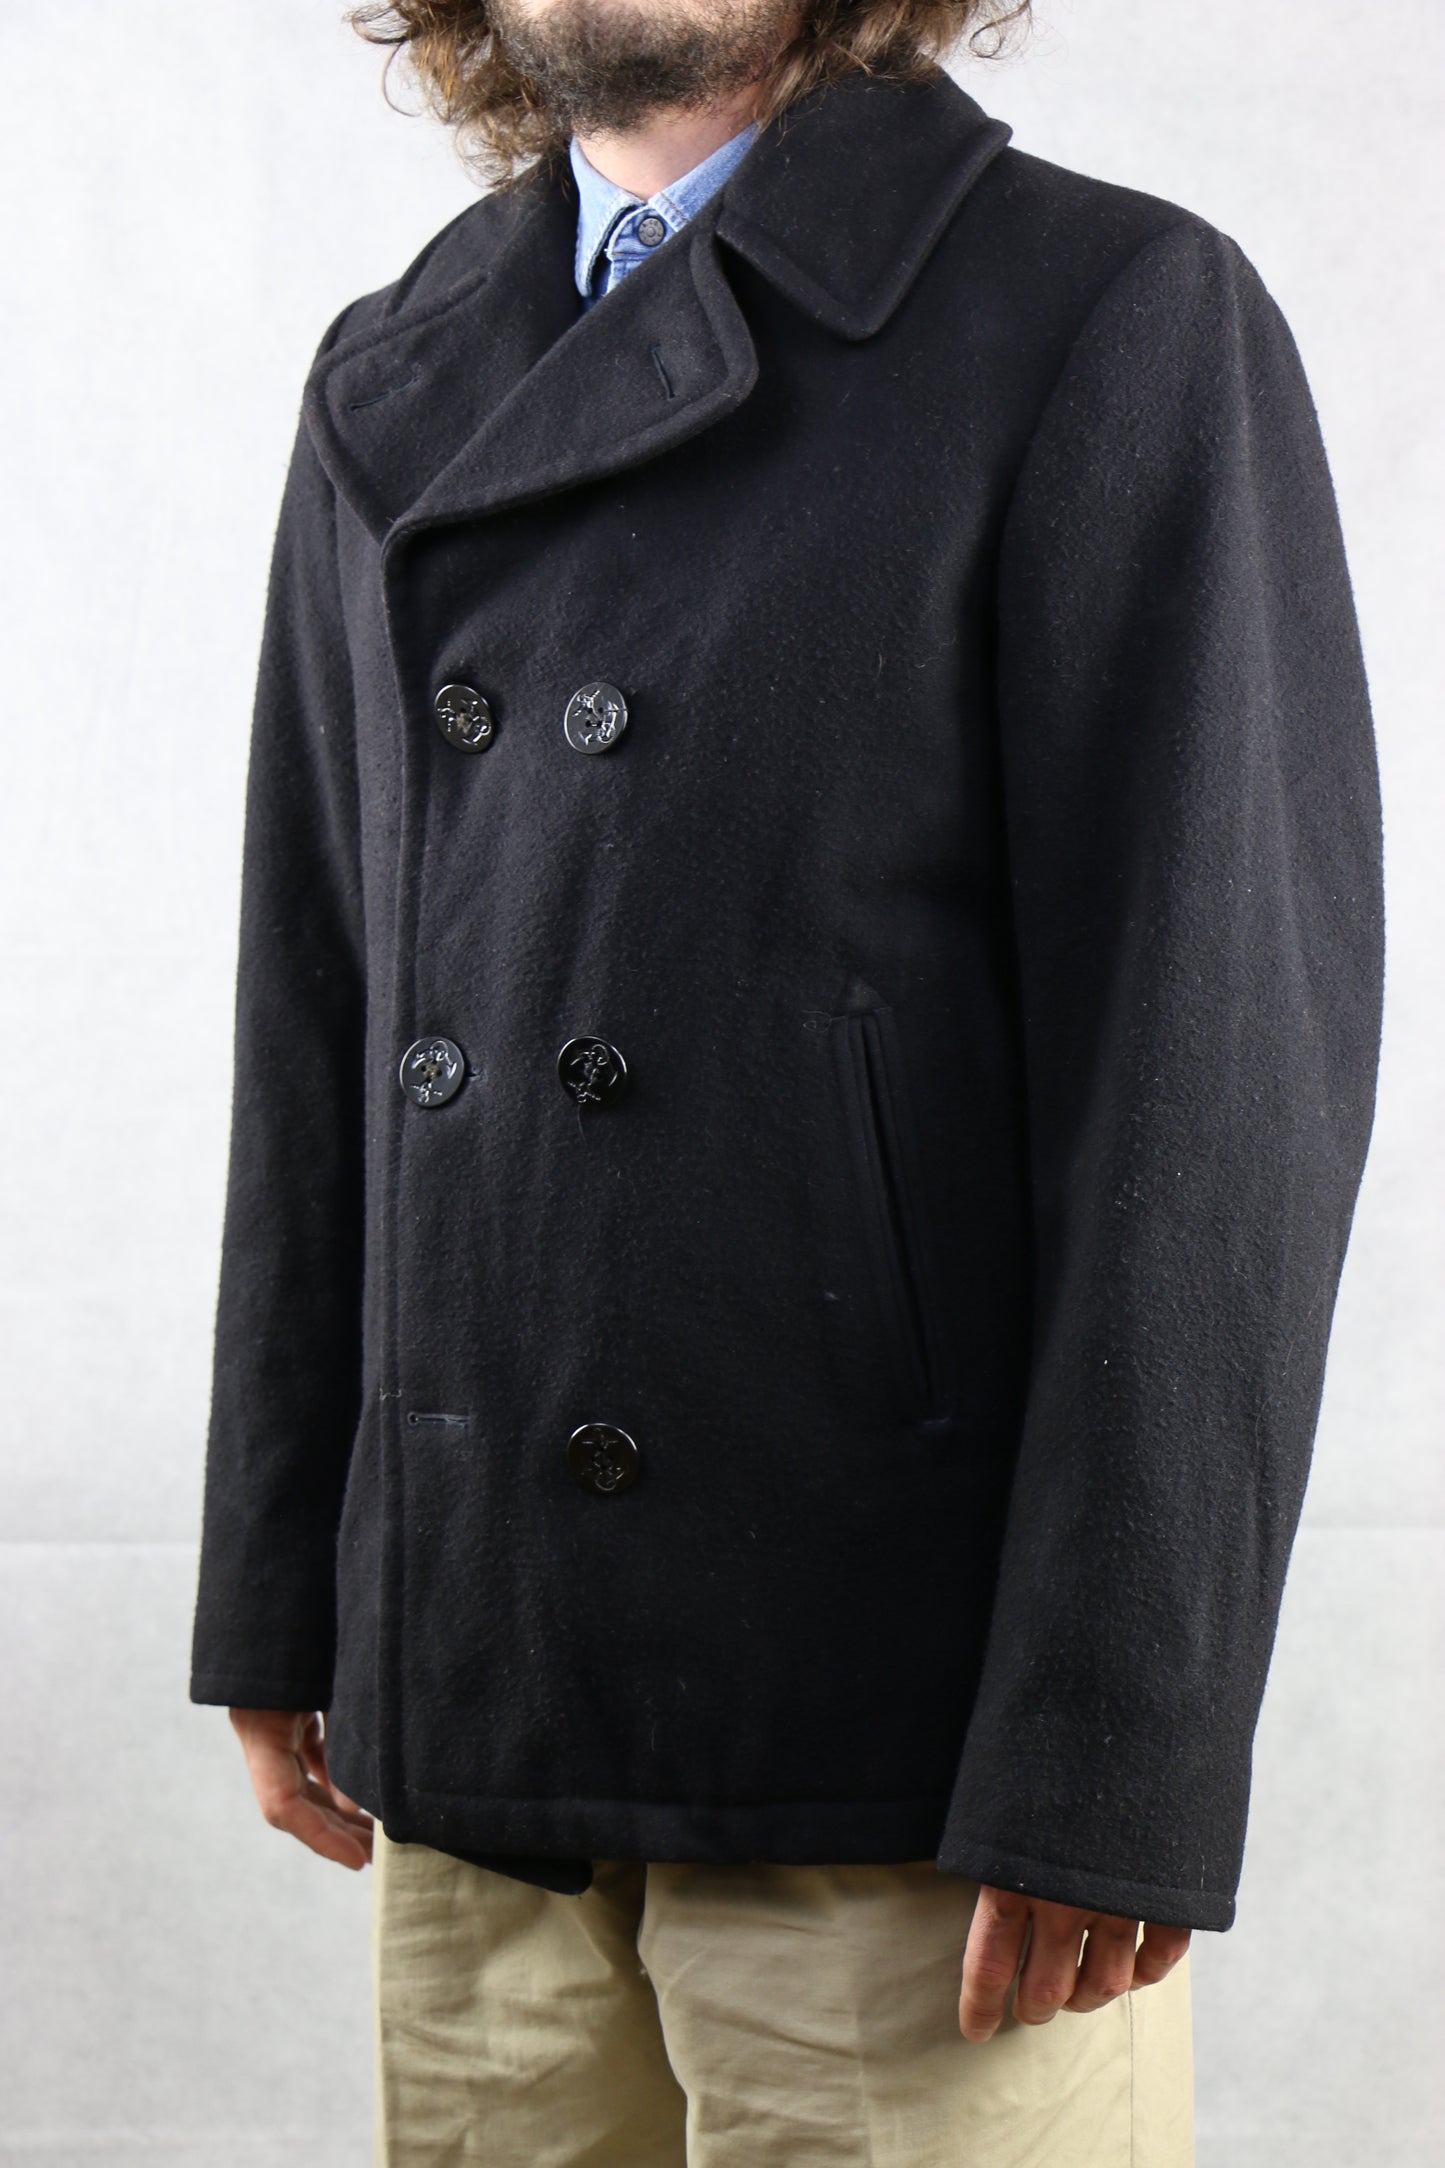 Peacoat 8 Buttons - vintage clothing clochard92.com